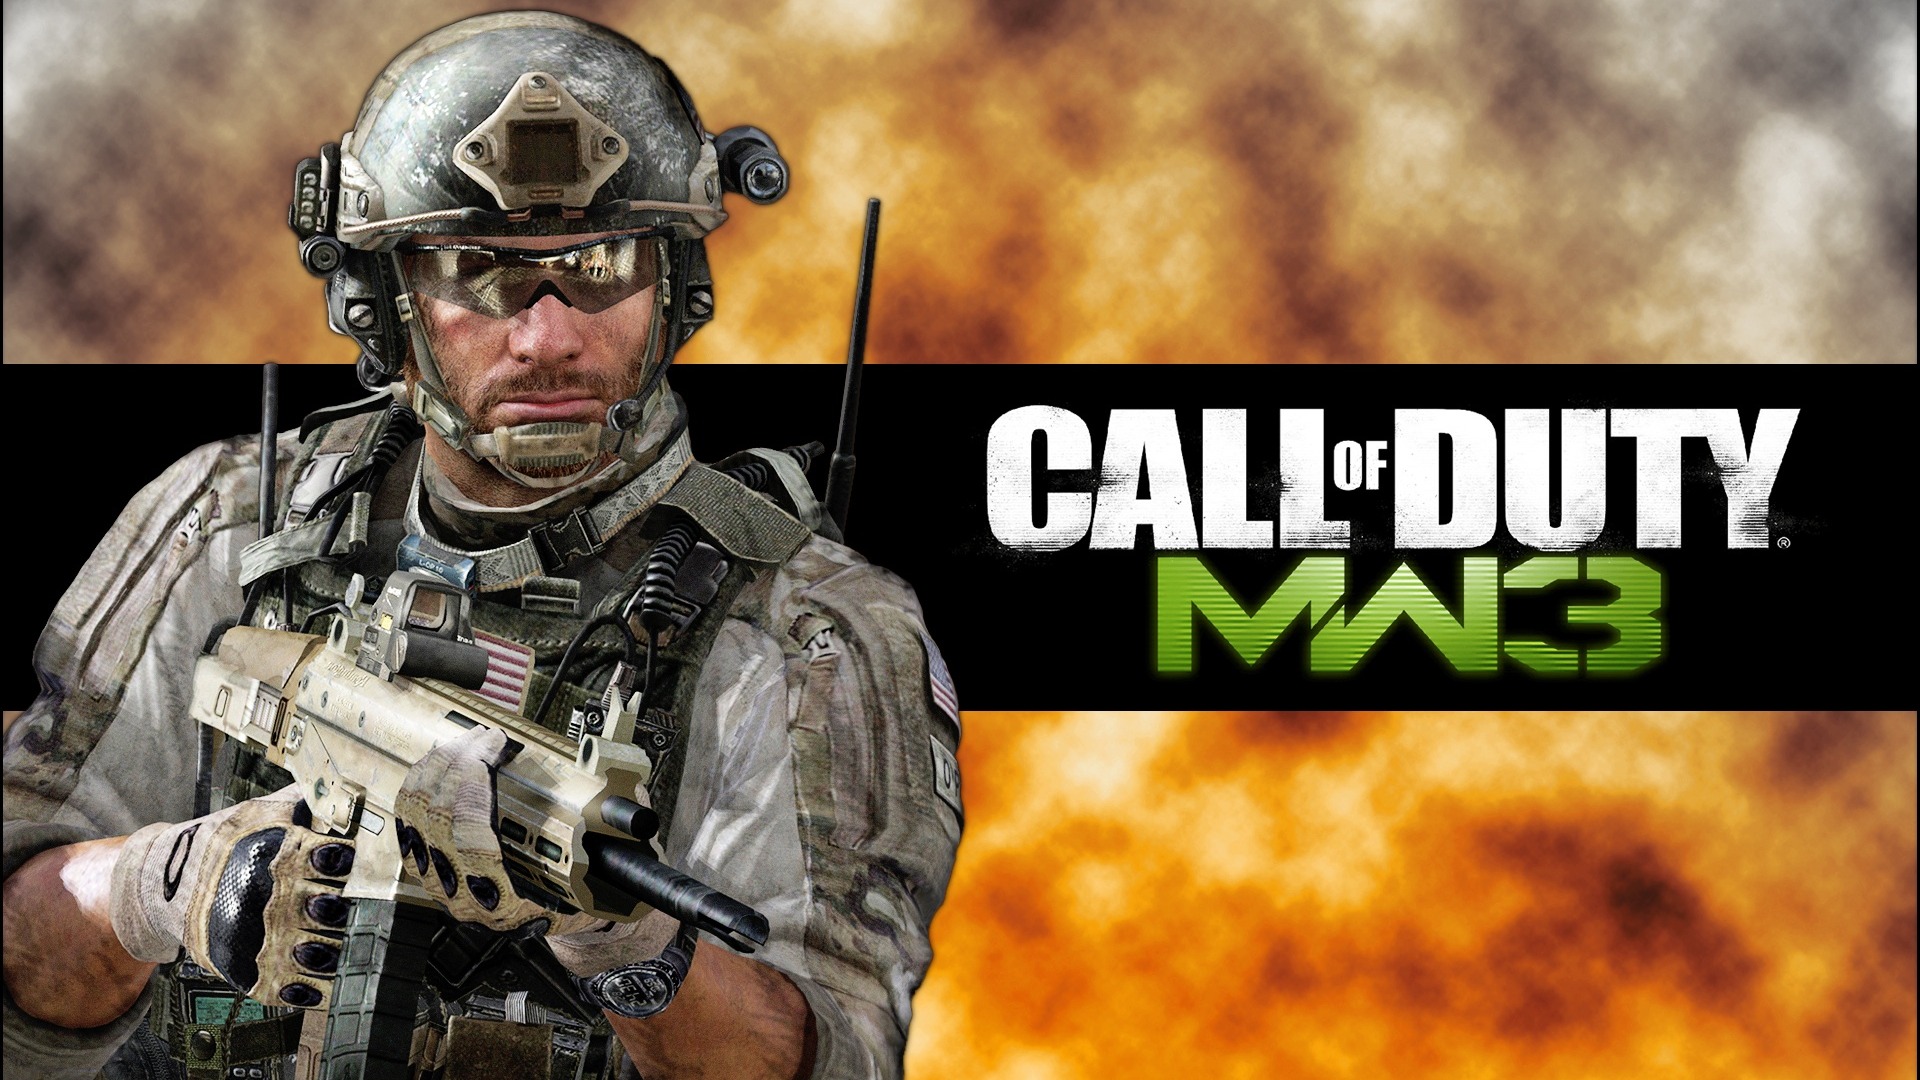 Call of Duty: MW3 HD wallpapers #14 - 1920x1080